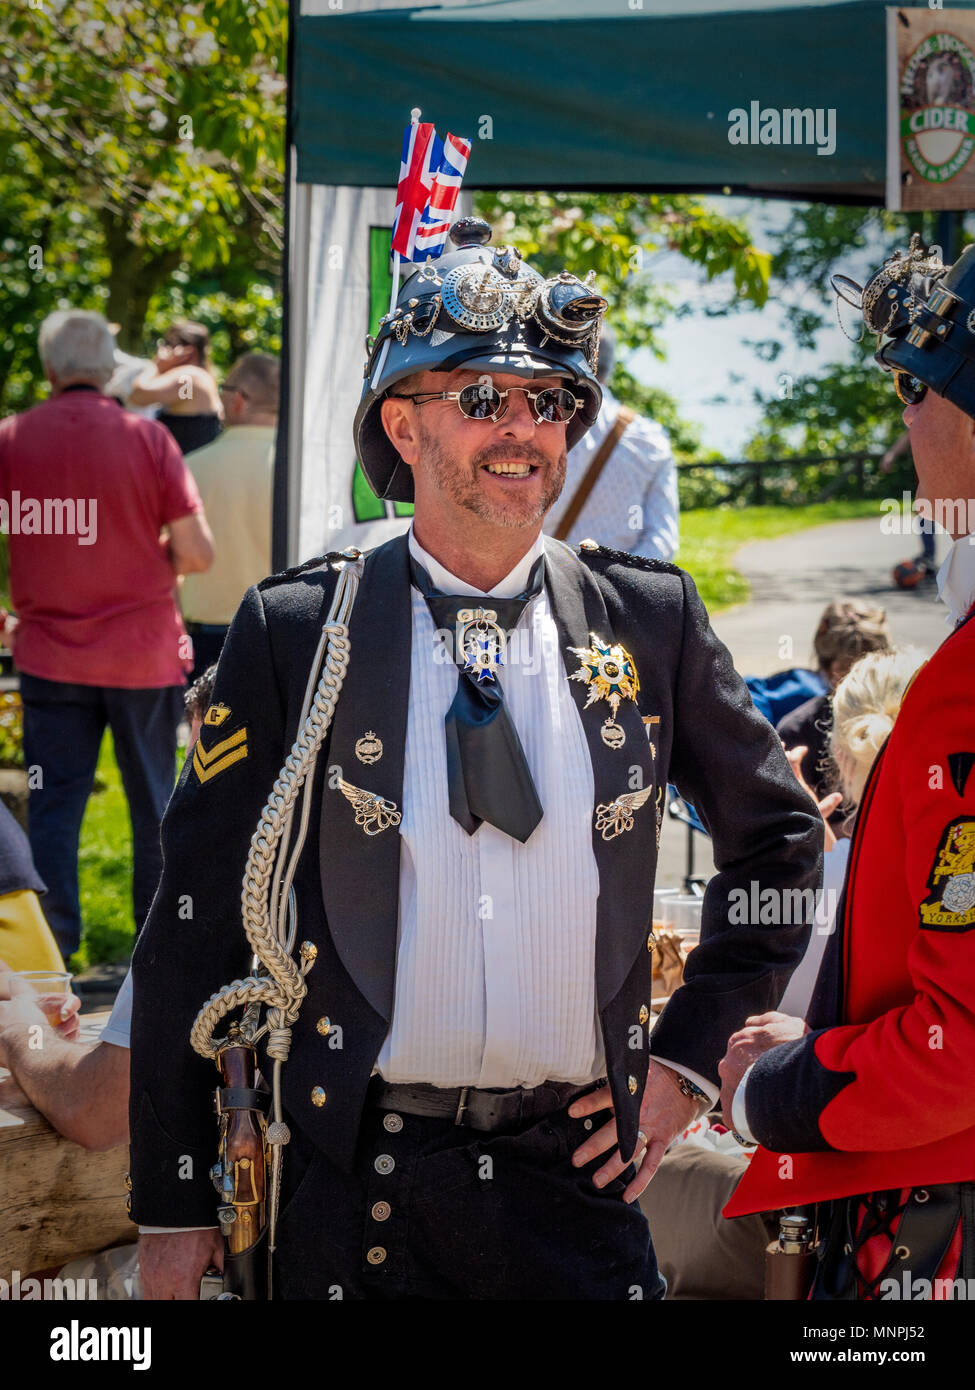 Filey, UK. 19th May, 2018. Many costumes incorporate Union Jack designs during the 2nd annual Filey Steampunk weekend as a nod towards the Royal Wedding. The steampunk fan weekend has returned for a second year and is attracting Steampunk fans from all over the UK. Photo Bailey-Cooper Photography/Alamy Live News Stock Photo